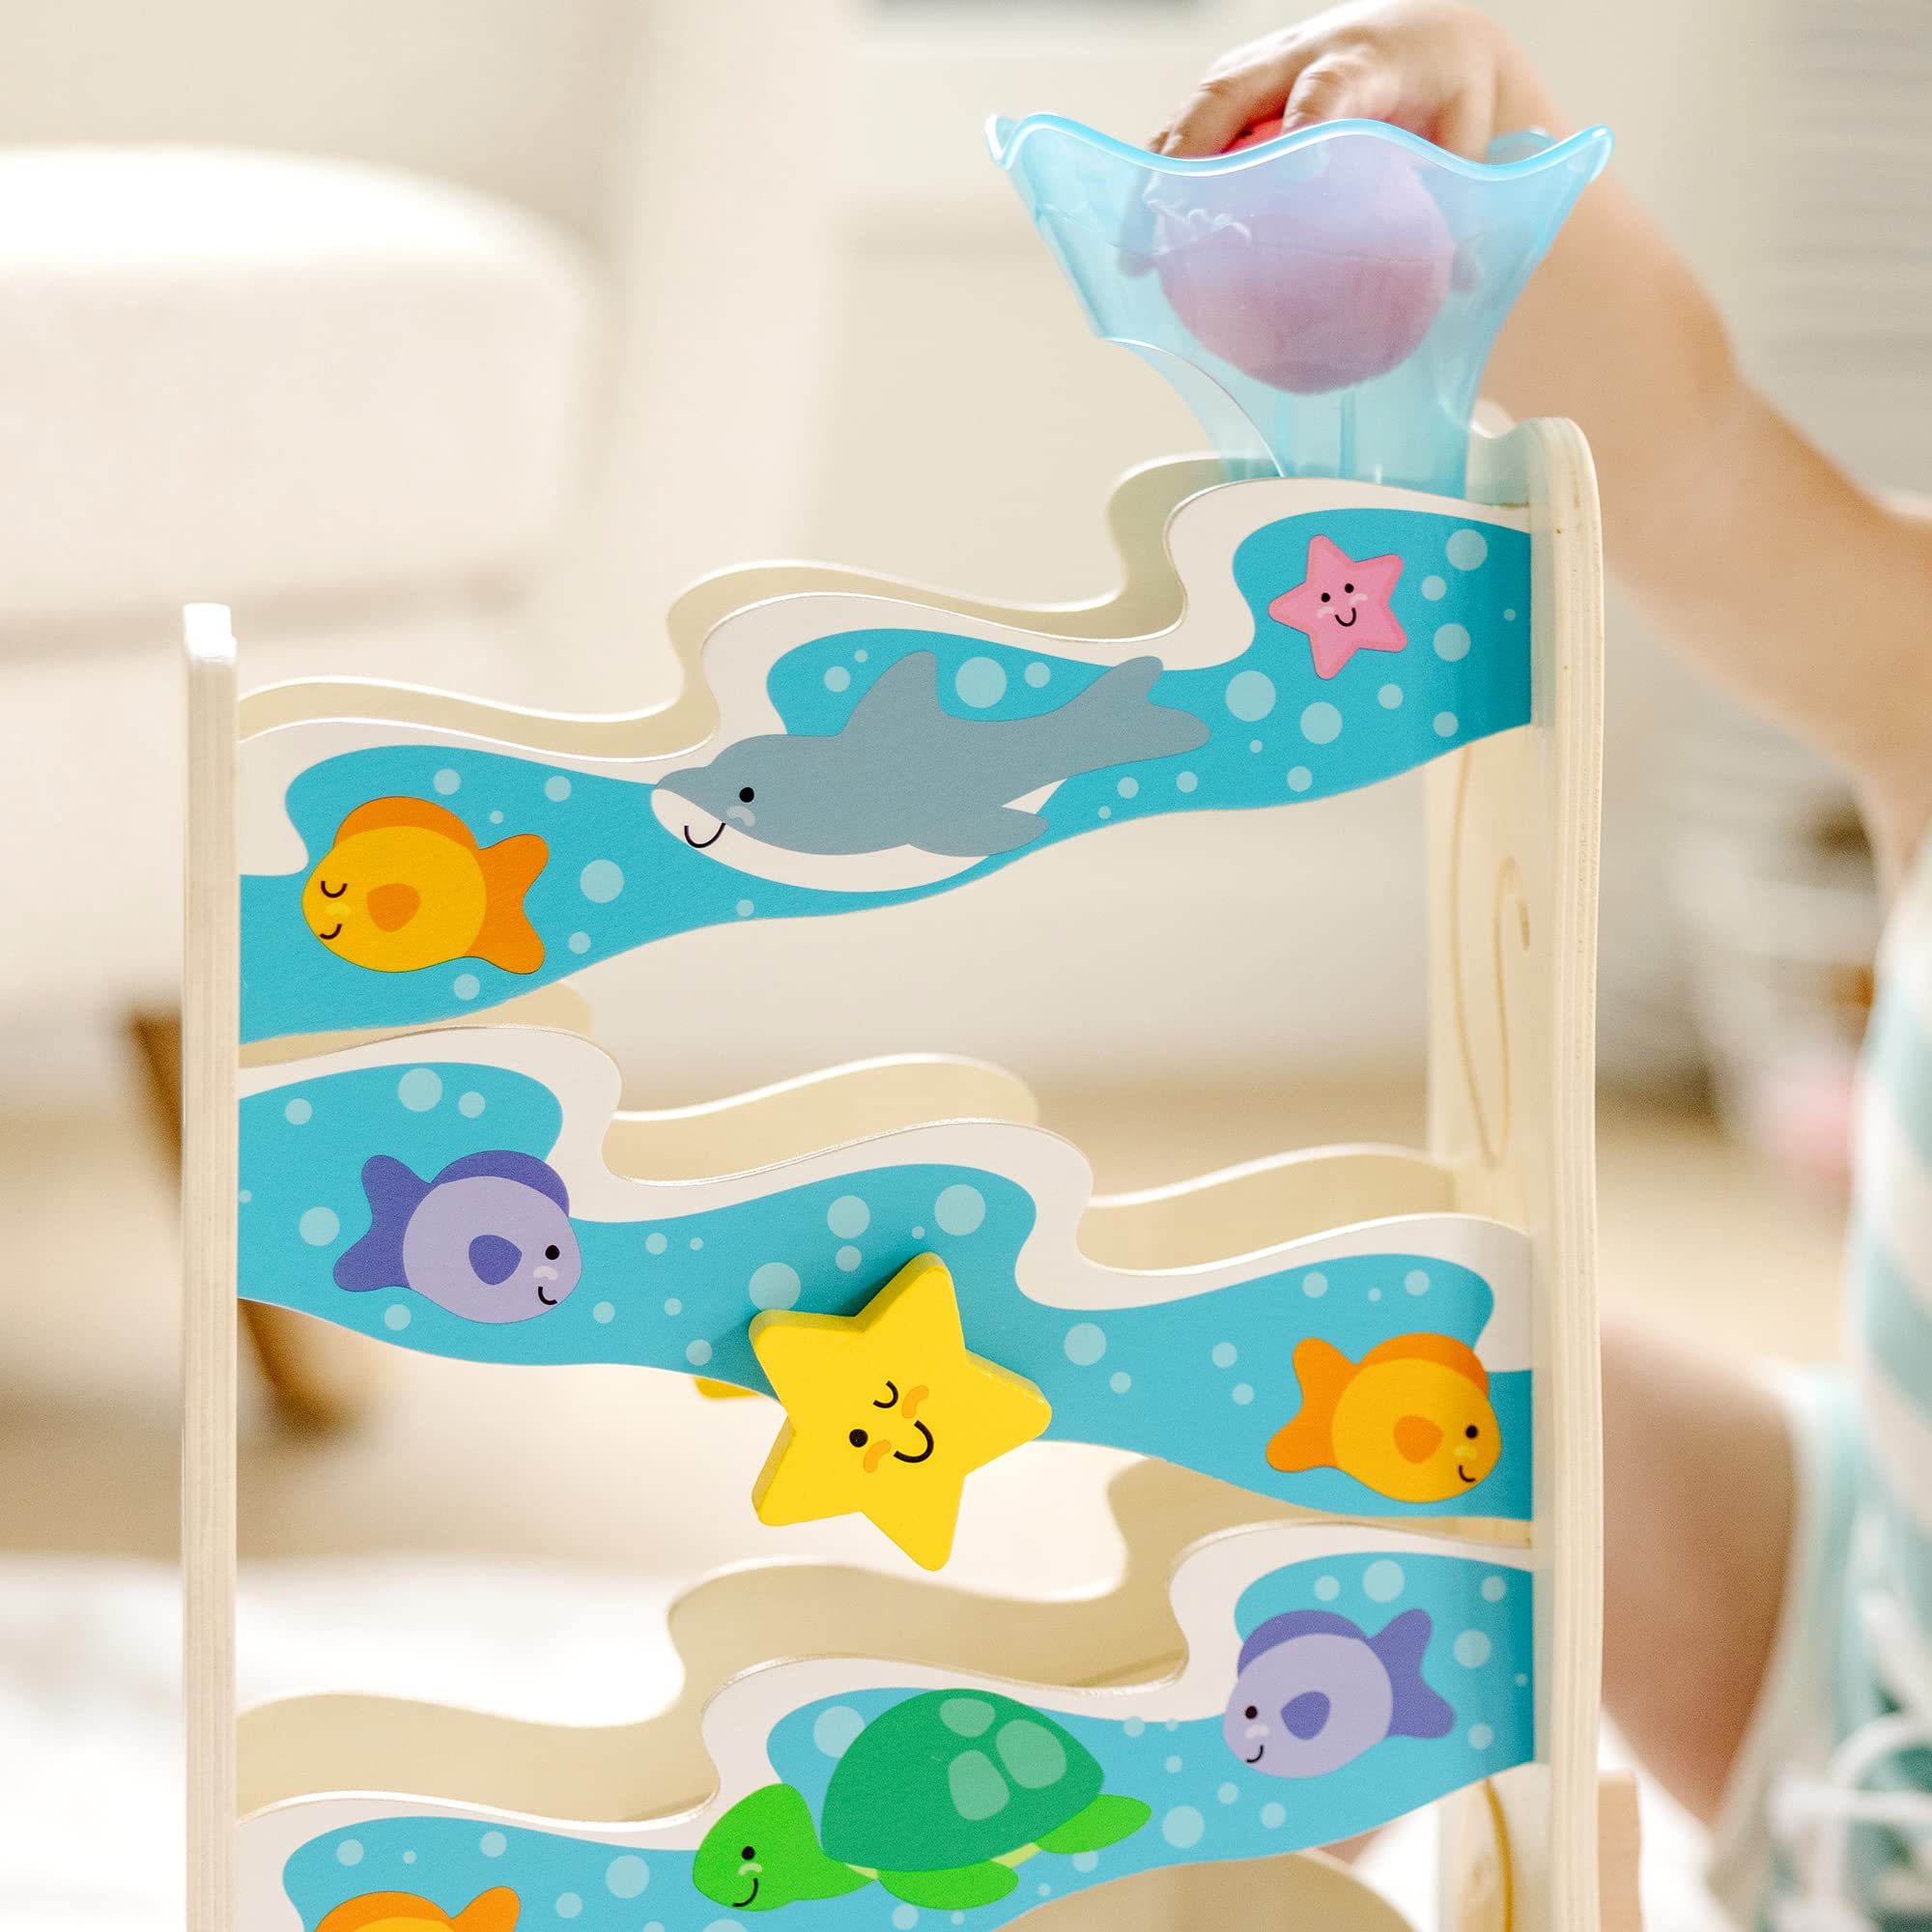 Melissa & Doug Rollables Wooden Ocean Slide Toy (5 Pieces) - Ocean Themed , Early Learning Toys For Infants And Toddlers Ages 1+